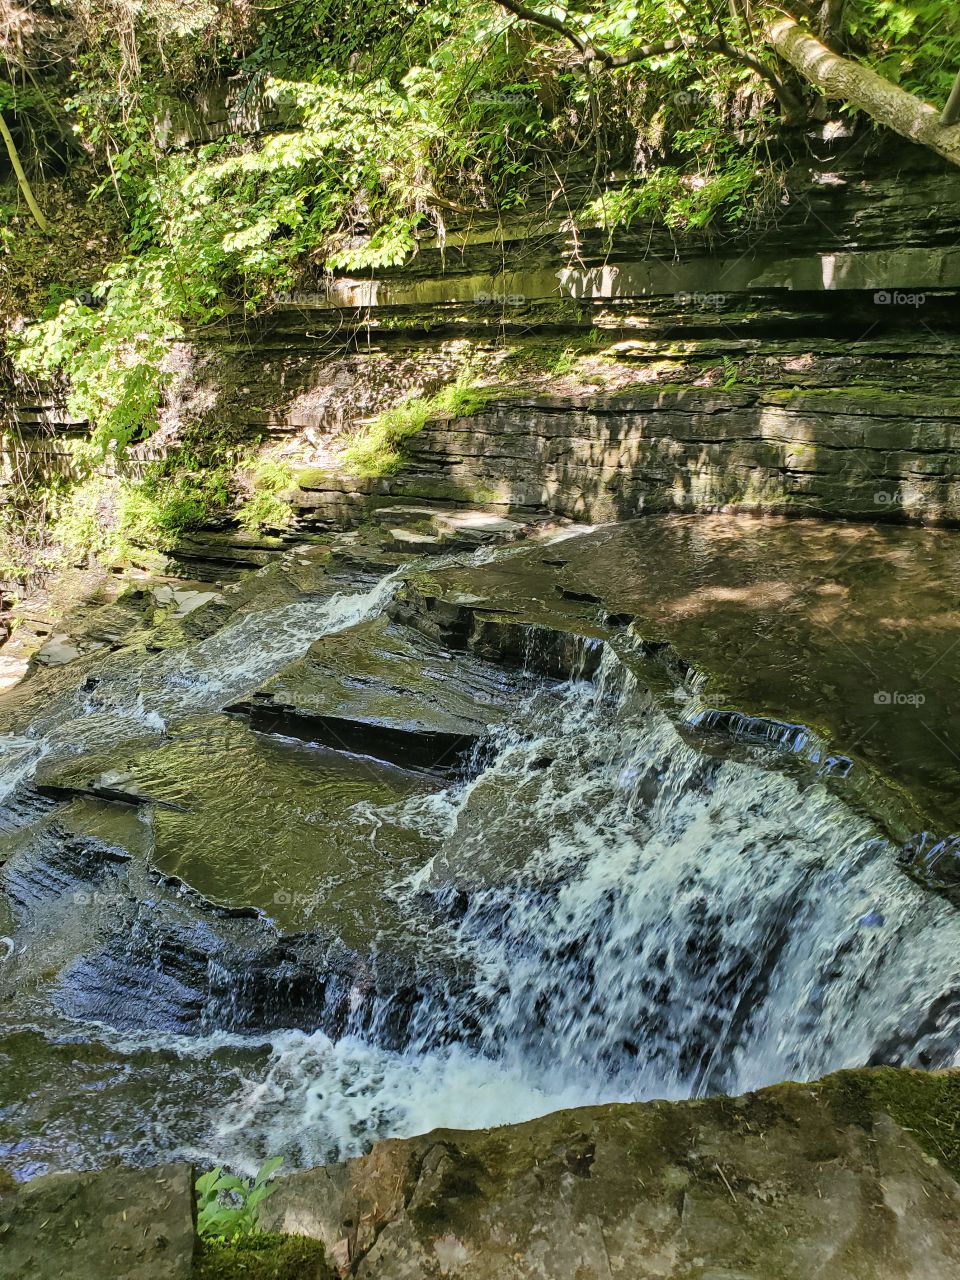 Layers of rocks slowly become a deeper pool below, as water cascades downing a shady grove